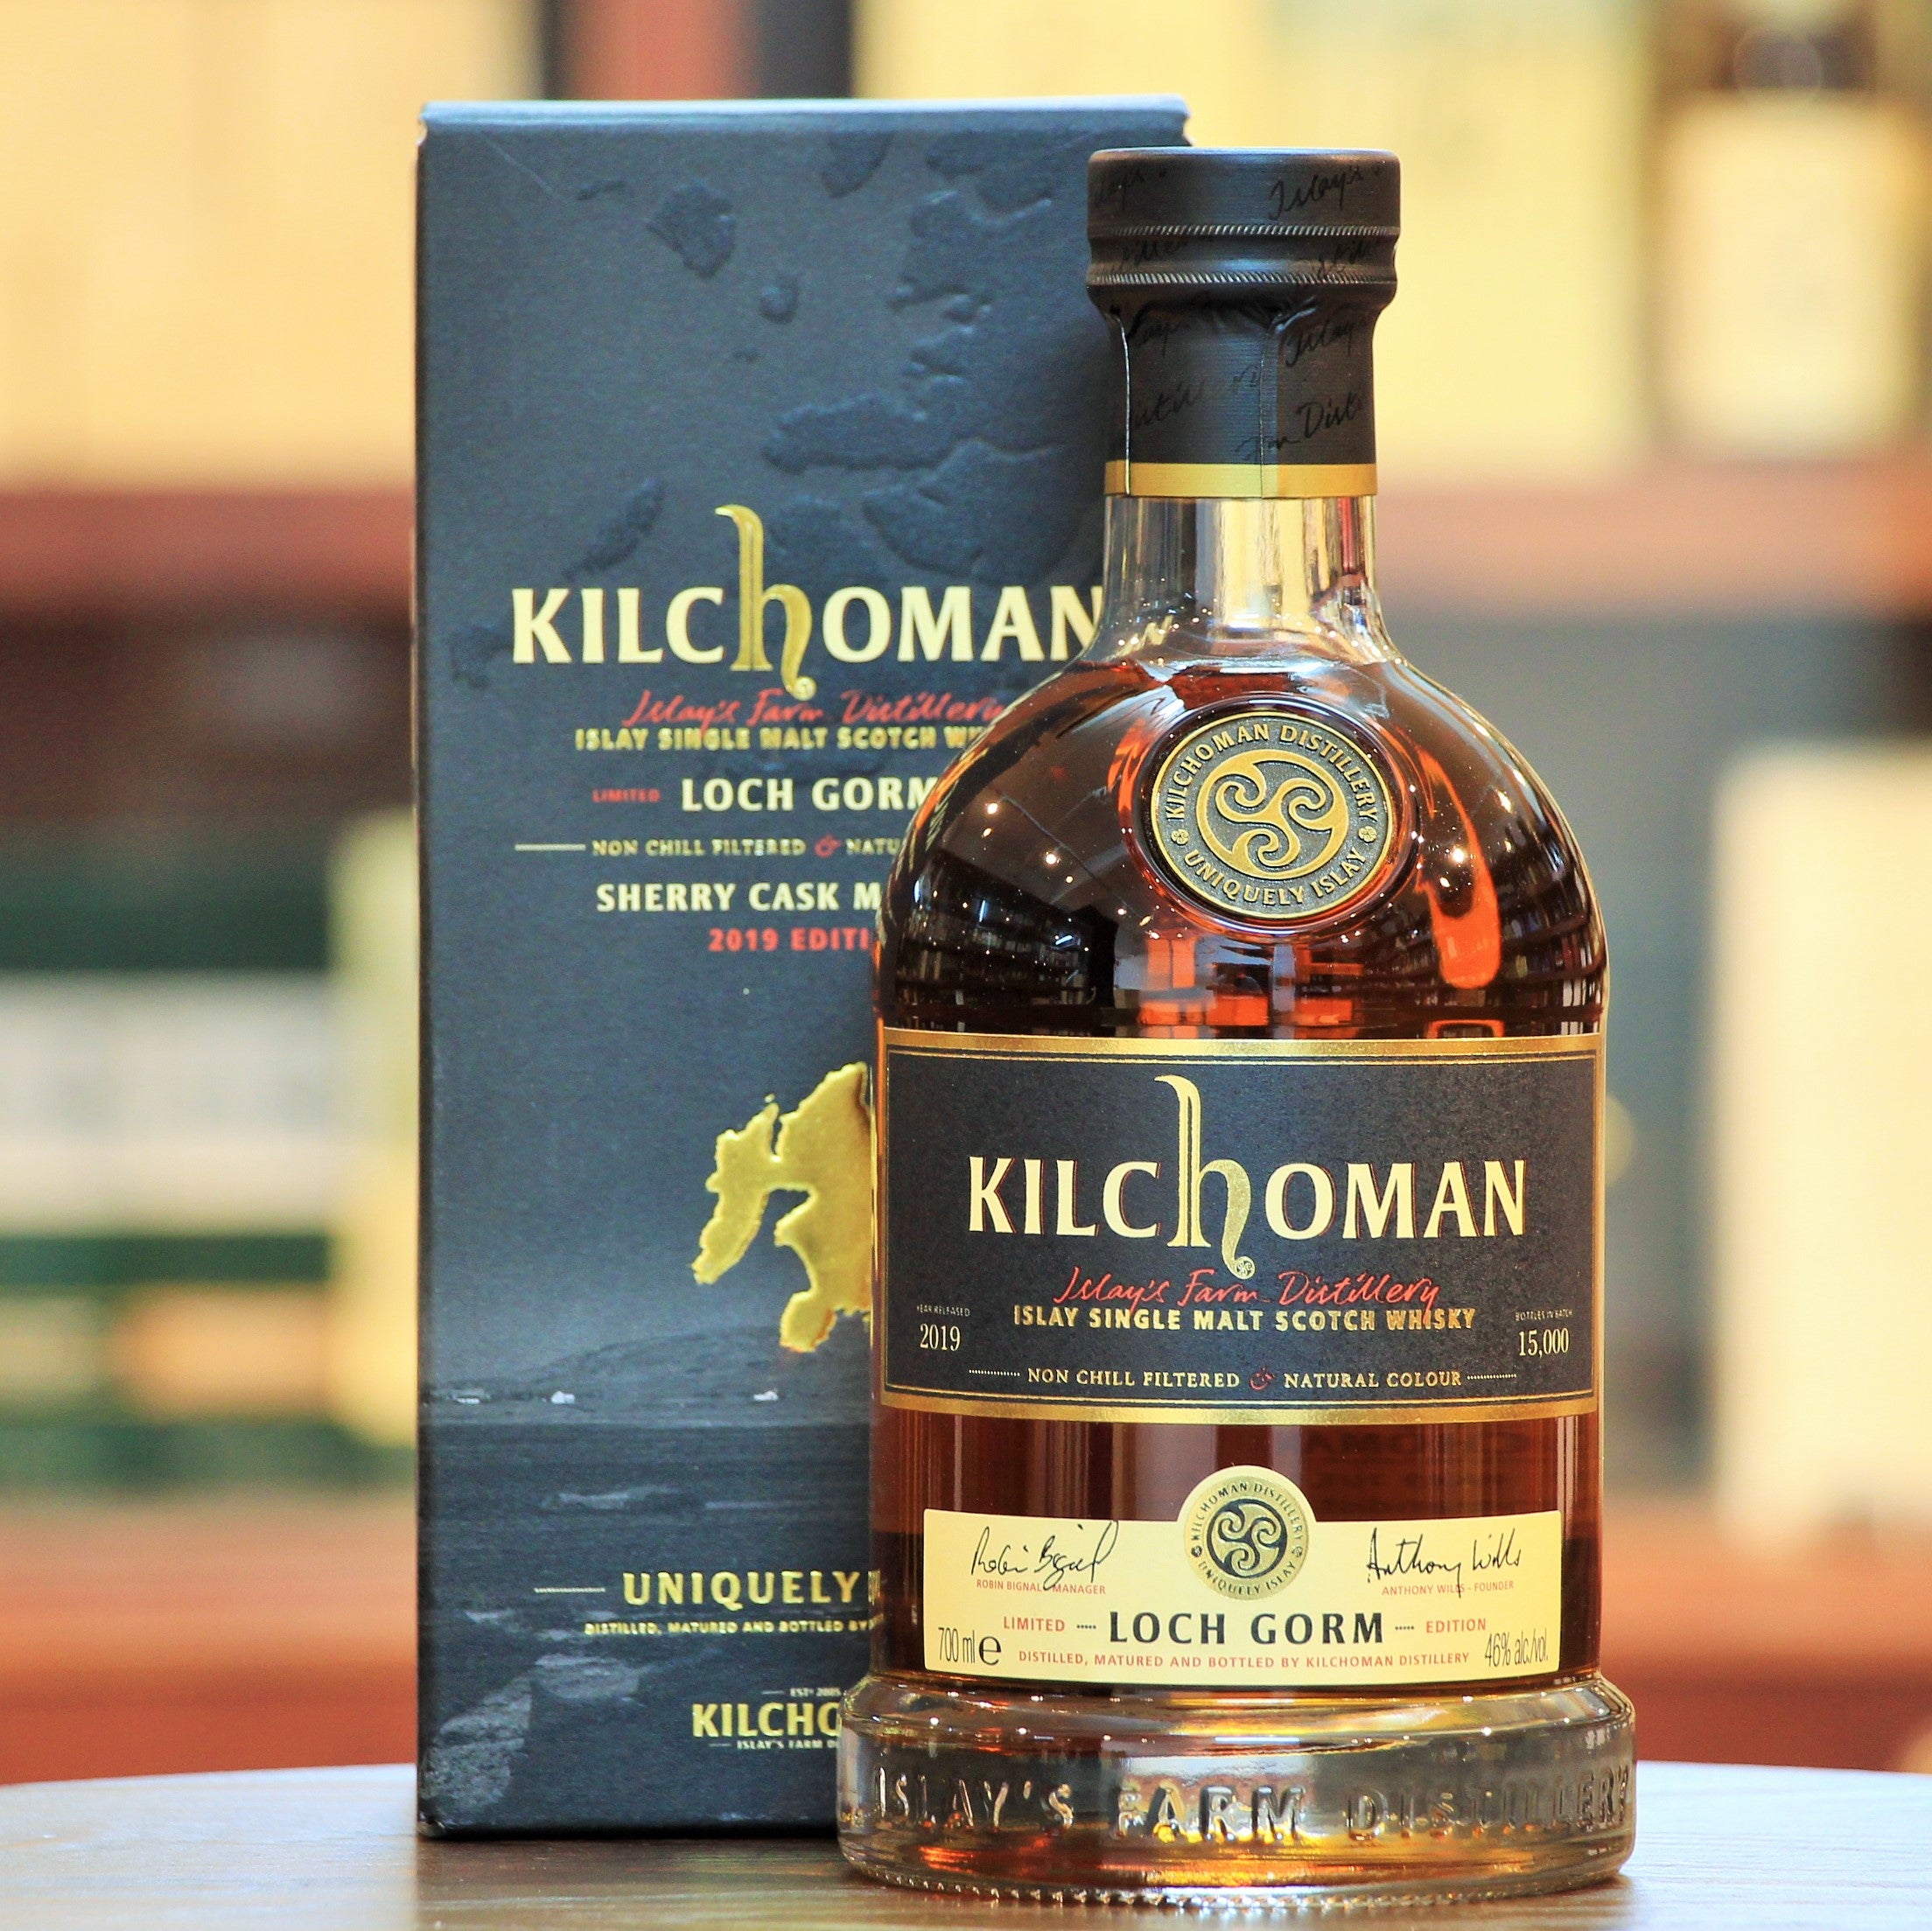 Islay Kilchoman Awardwinning Sherry Cask Whisky LochGorm is a rich and full bodied whisky. Matured entirely in Oloroso Sherry Casks, this is a great combination of Islay Peat and Sherry Whisky without being too sweet and a smokiness at the back.